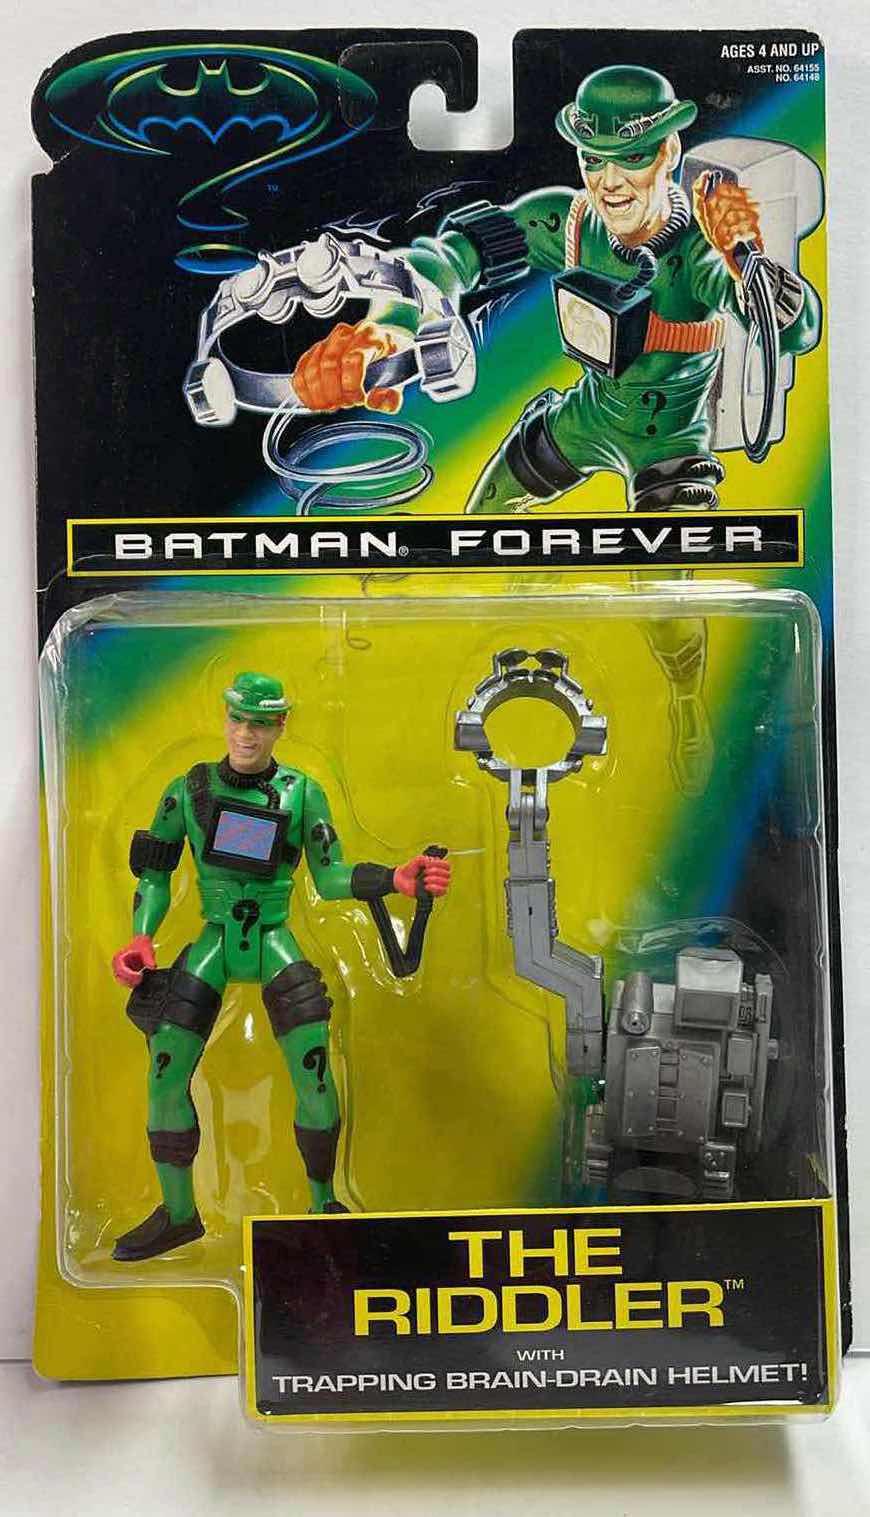 Photo 1 of NIB BATMAN FOREVER “THE RIDDLER WITH TRAPPING BRIAN - DRAIN HELMET- RETAIL PRICE $15.00